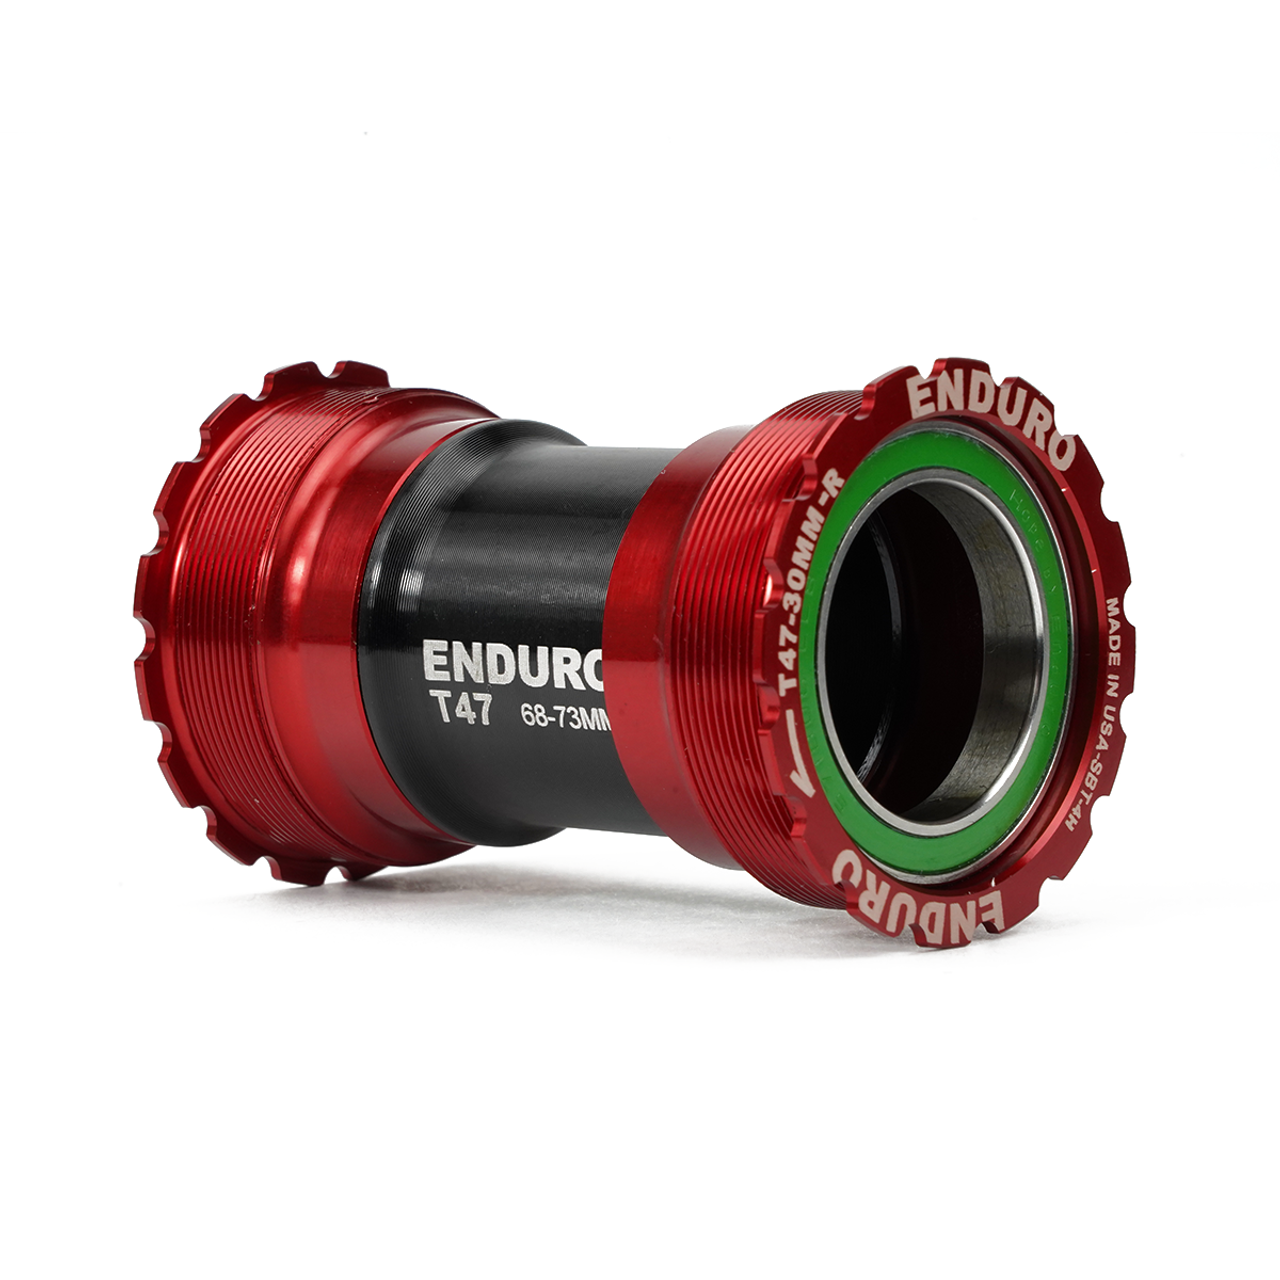 Enduro BKS-0200 - T47-Internal, Threaded, stainless steel, Angular Contact Bearing Bottom Bracket for T47 Framesets and 30mm Cranksets (spindle length under 90mm) - Red